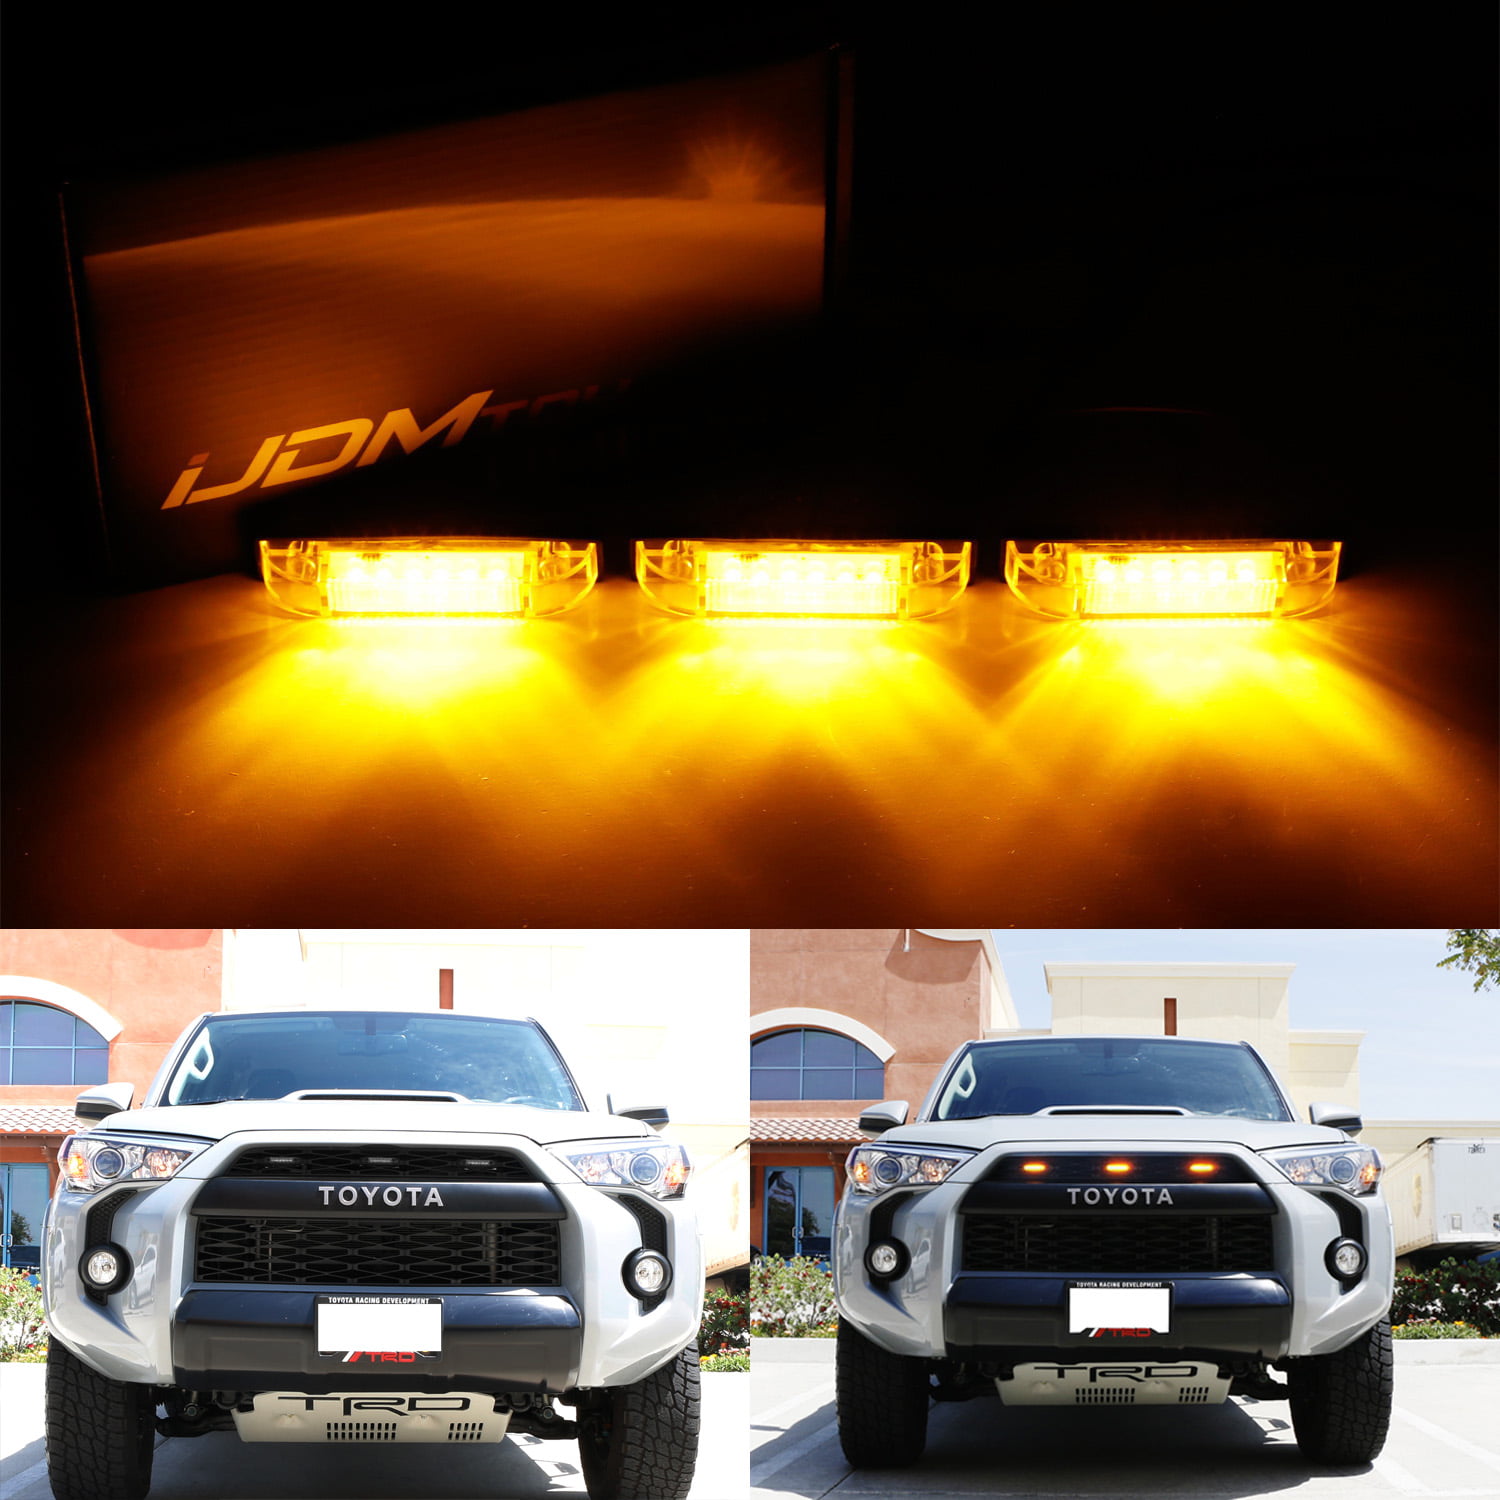 iJDMTOY 3pc Amber LED Center Grille Marker Lights For 2014-up Toyota 4Runner or 2012-up Toyota Tacoma TRD Pro Amber Lens, 6-LED, Come w/Wiring and Hardware